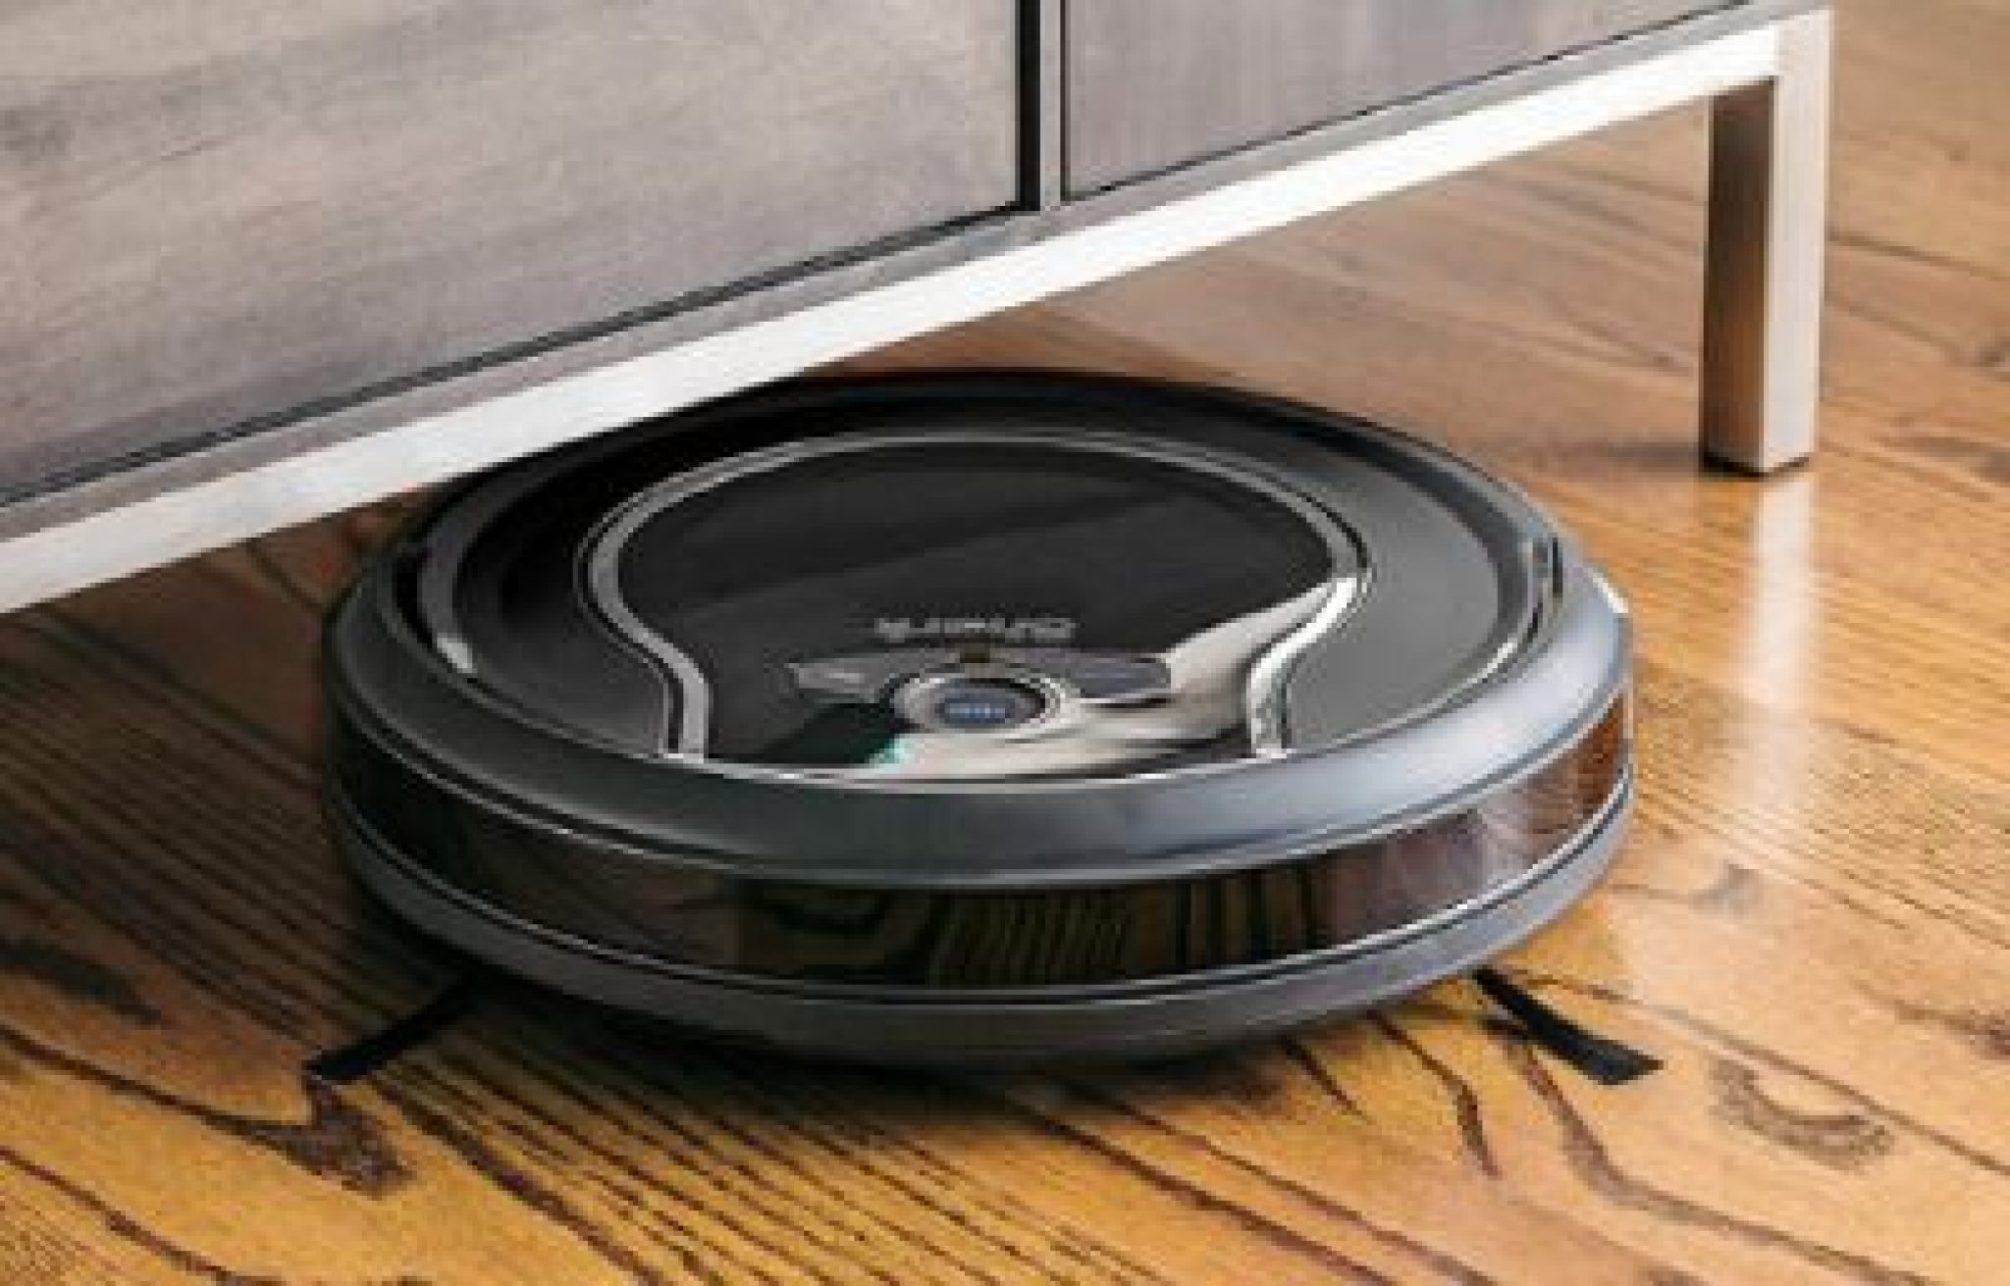 Top 9 Best Highest Rated Robotic Vacuums In 2022